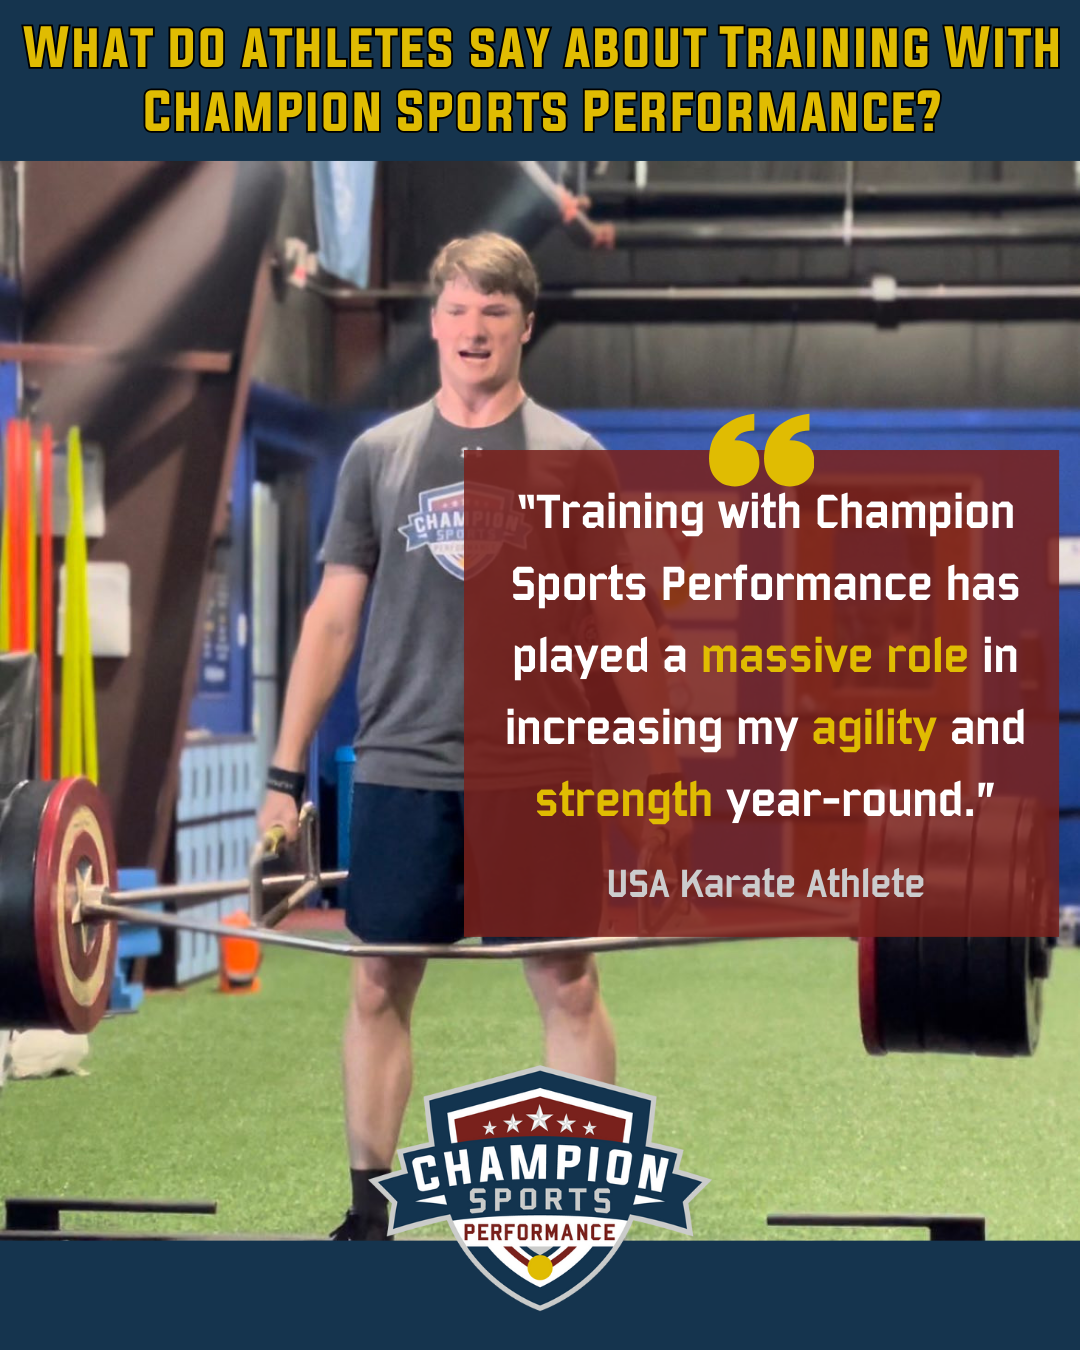 Karate - Training with Champion Sports Performance has played a massive role in increasing my agility and strength year-round.